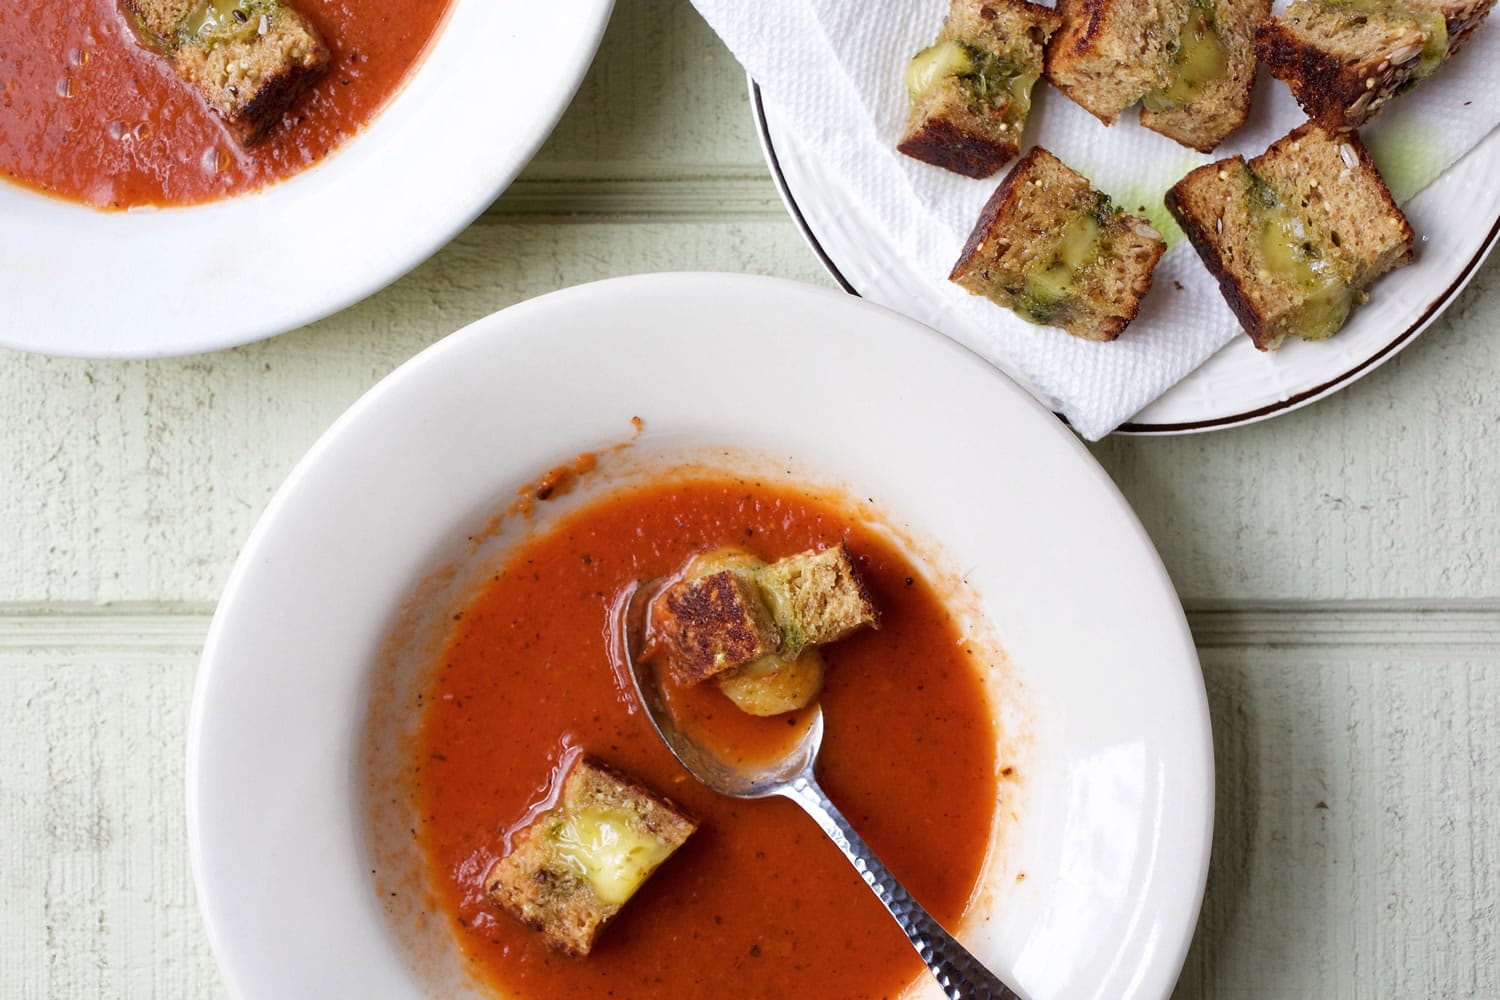 Tomato soup with grilled Havarti cheese croutons.